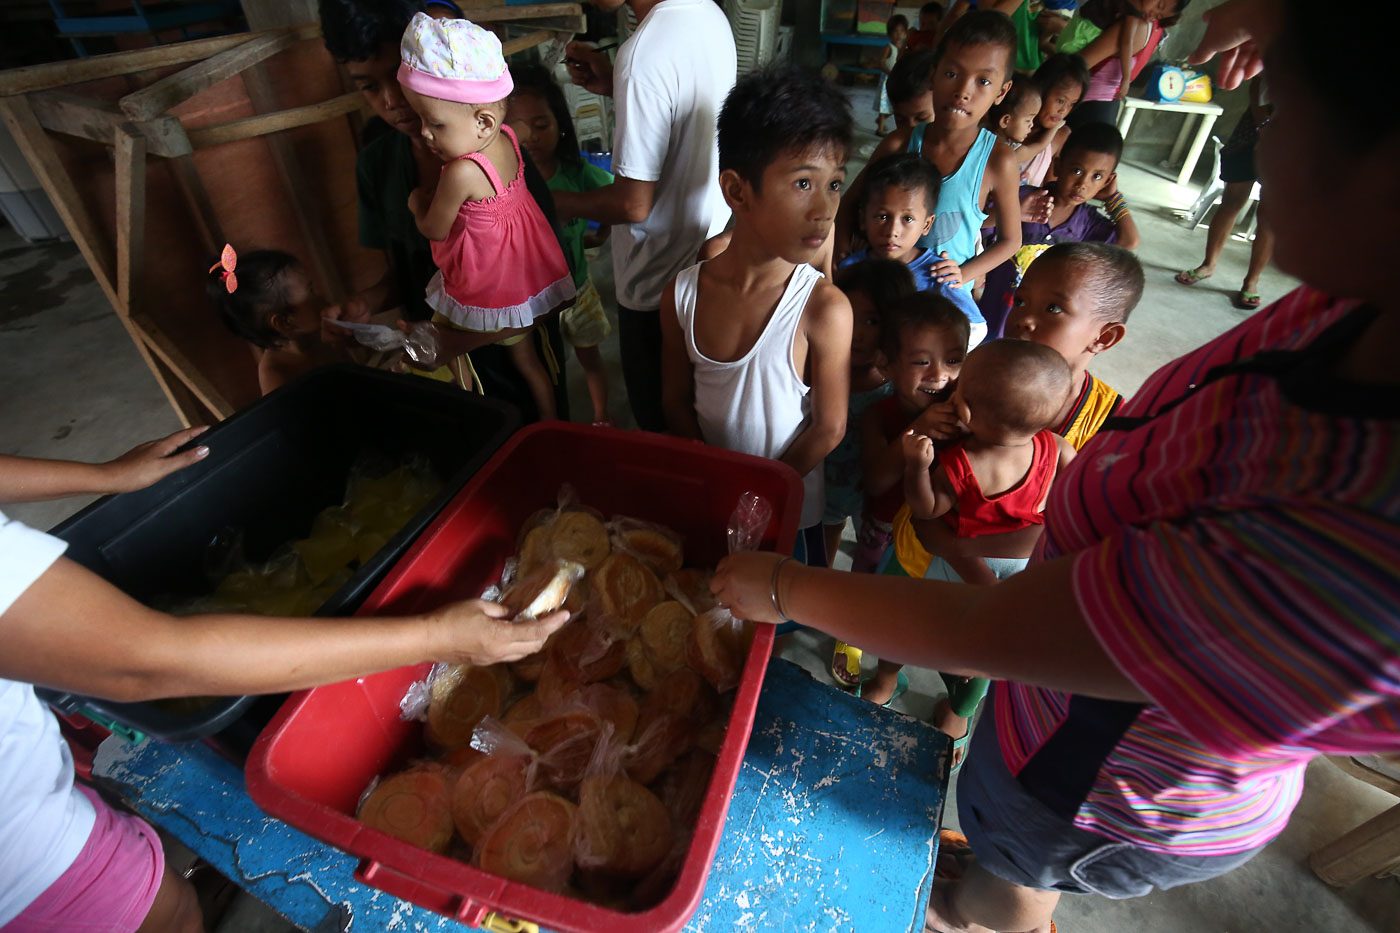 FEEDING PROGRAM. Children queue for free ensaymada and juice during a feeding program in Baseco, Manila on July 4, 2018, as President Rodrigo Duterte recently signs into law the establishment of a national feeding program to address hunger and undernutrition. Photo by Ben Nabong/Rappler  